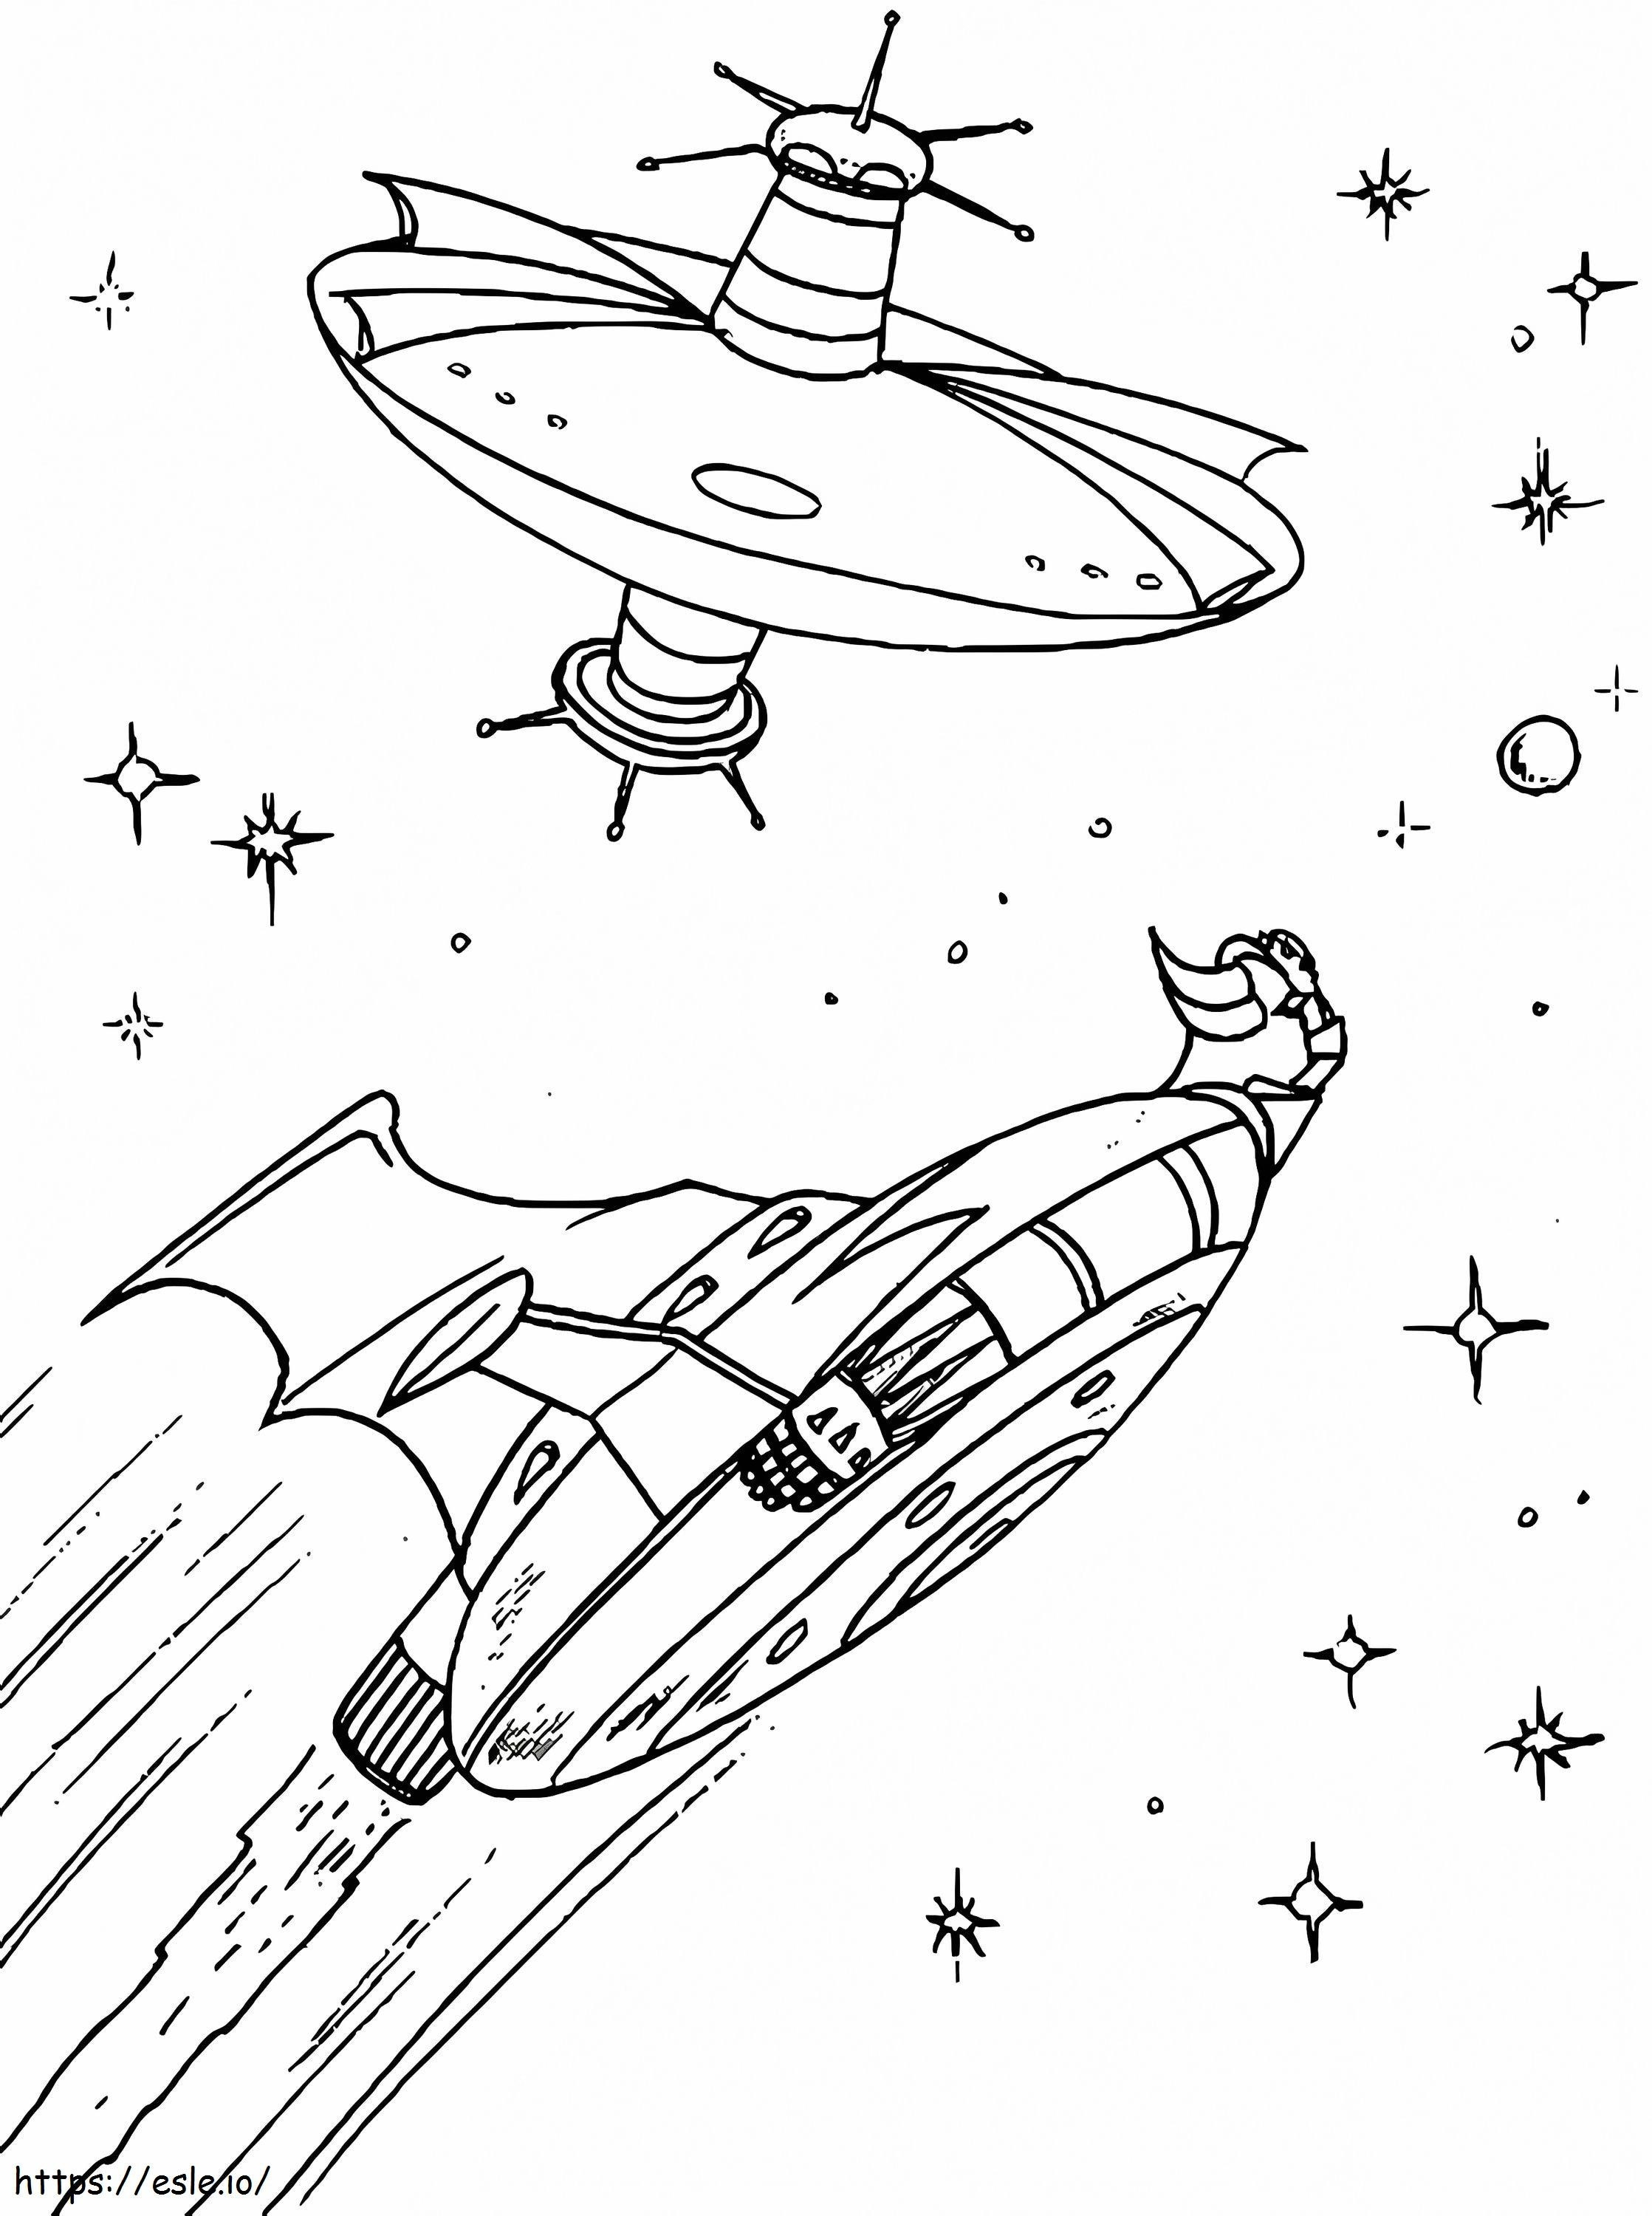 Goldorak Scene In The Universe coloring page